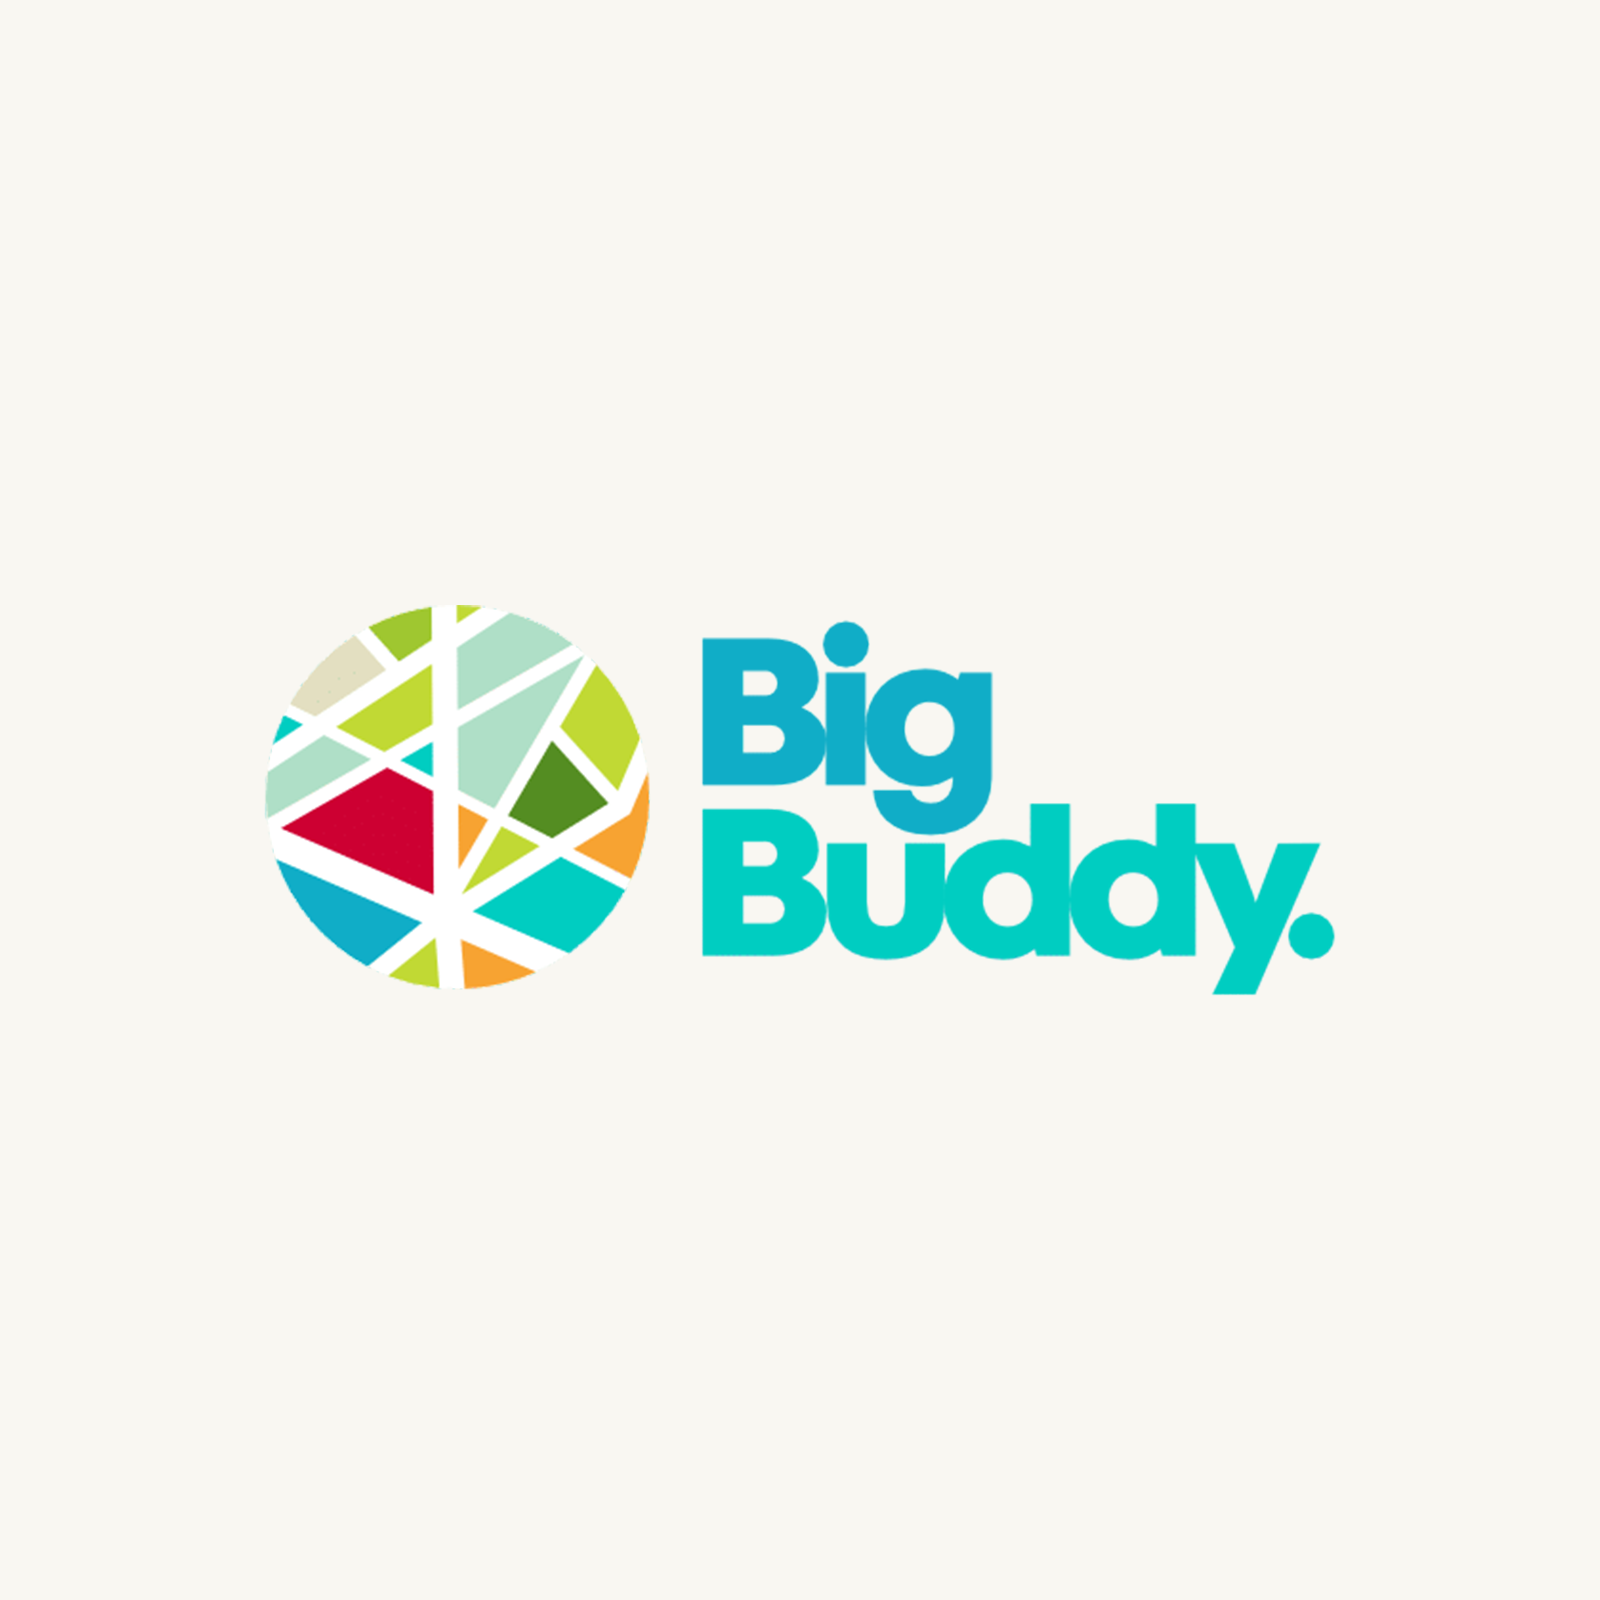 Jason Jenkins appointed as CEO of Big Buddy.